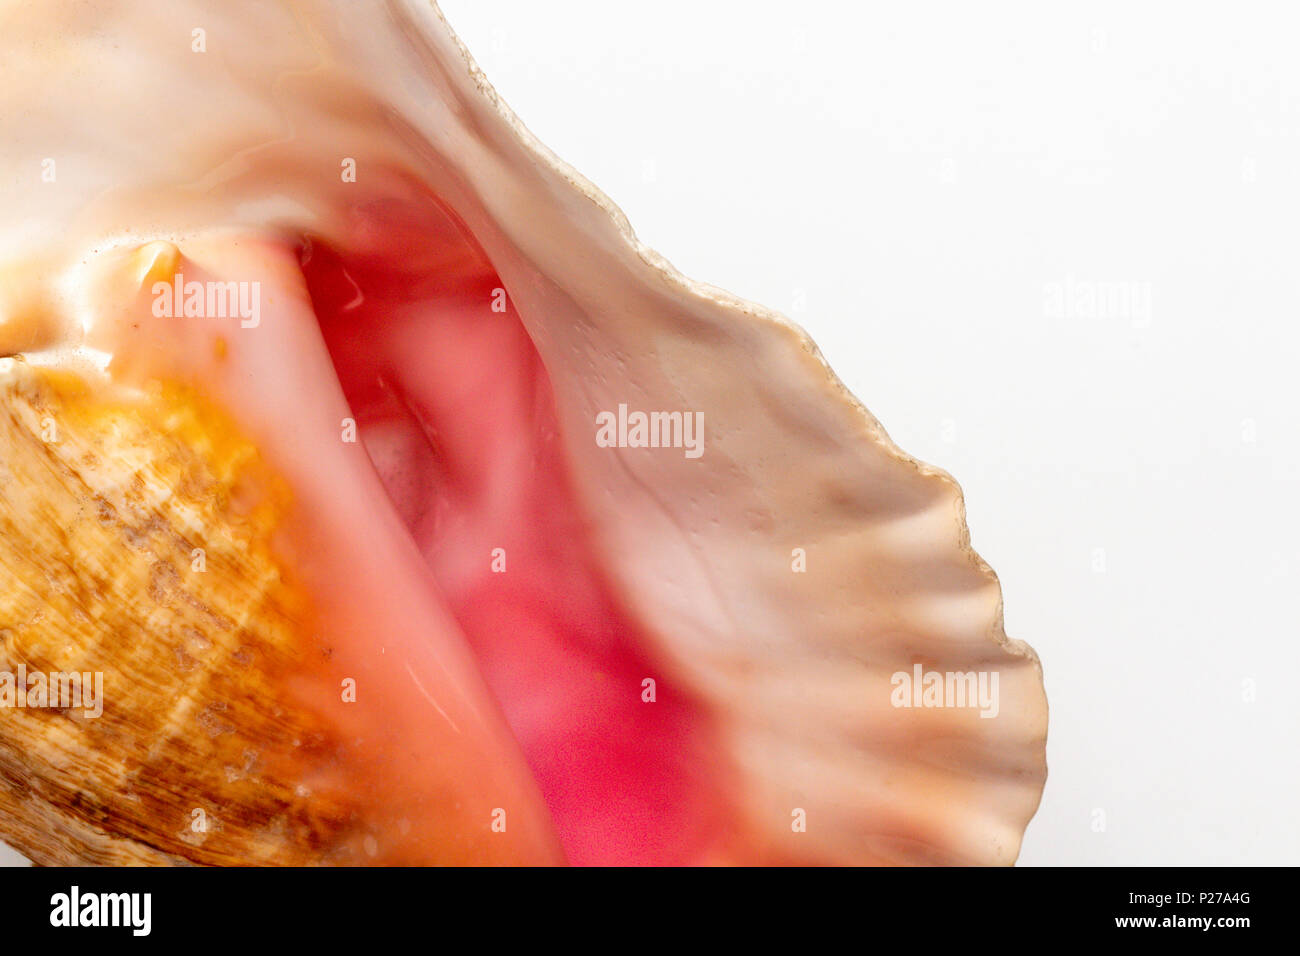 Dry gigantic sea shell. Soft surface inside, rough and textured on the outside. Stock Photo